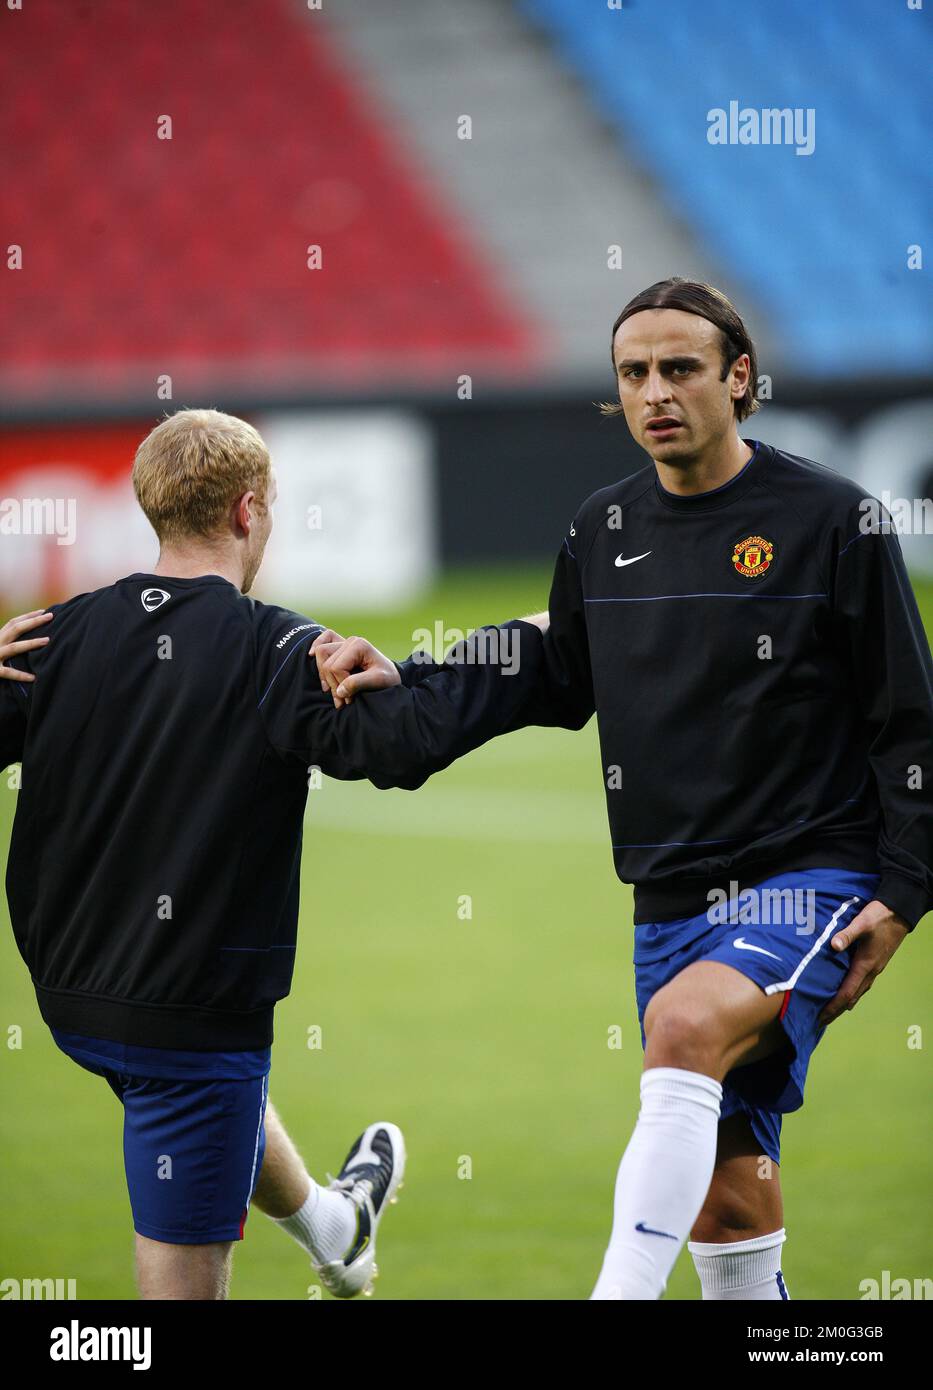 Manchester United players Dimitar Berbatov, right, and Paul Scholes, left, are seen during a training session Monday Sept. 29, 2008 in Aalborg, ahead of their Champions League match against Danish team Aalborg on Tuesday in Aalborg, Denmark. (AP Photo/Polfoto/Mick Anderson) ** DENMARK OUT ** Stock Photo